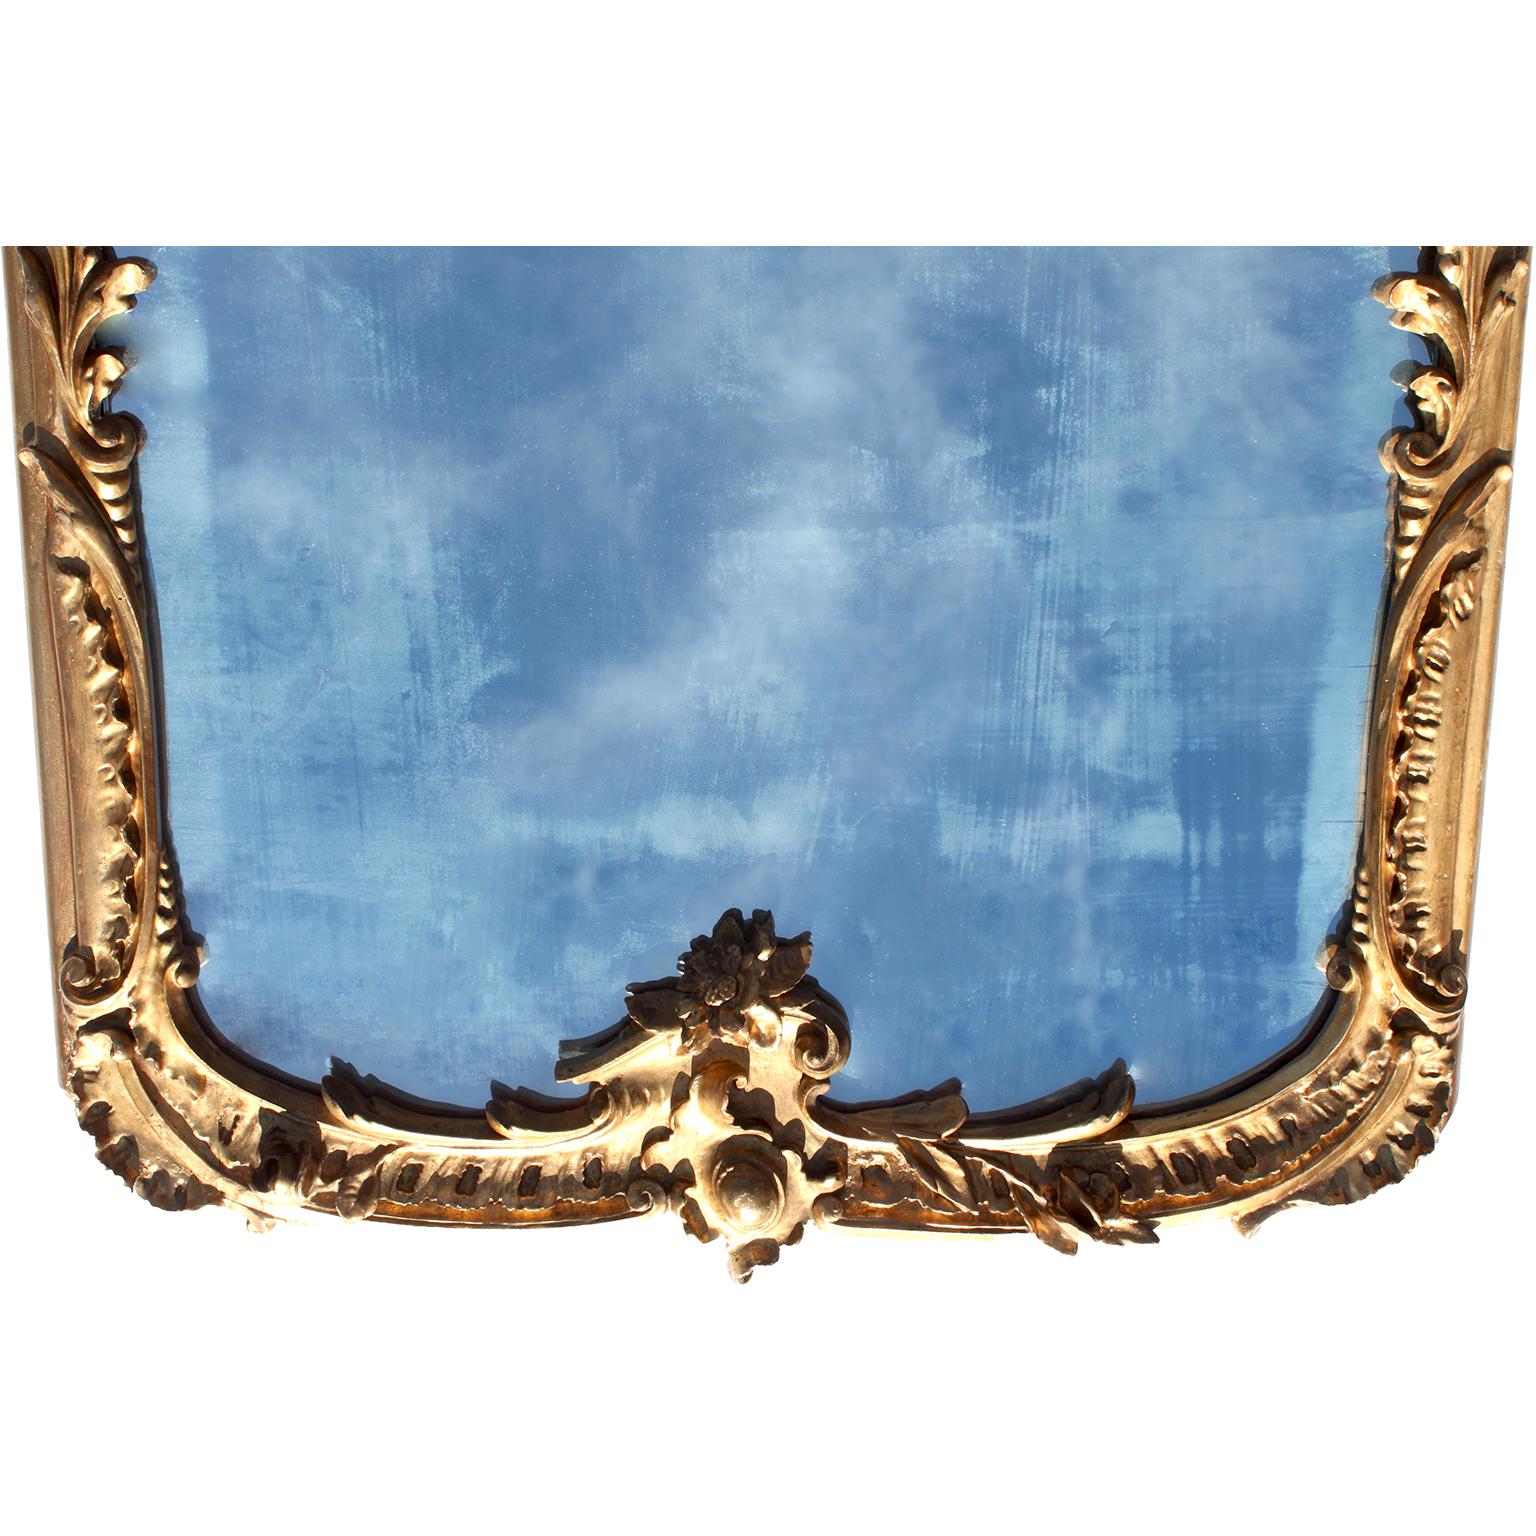 Whimsical French 19th-20th Century Belle Époque Gilt-Wood Triptych Putti Mirrors For Sale 6